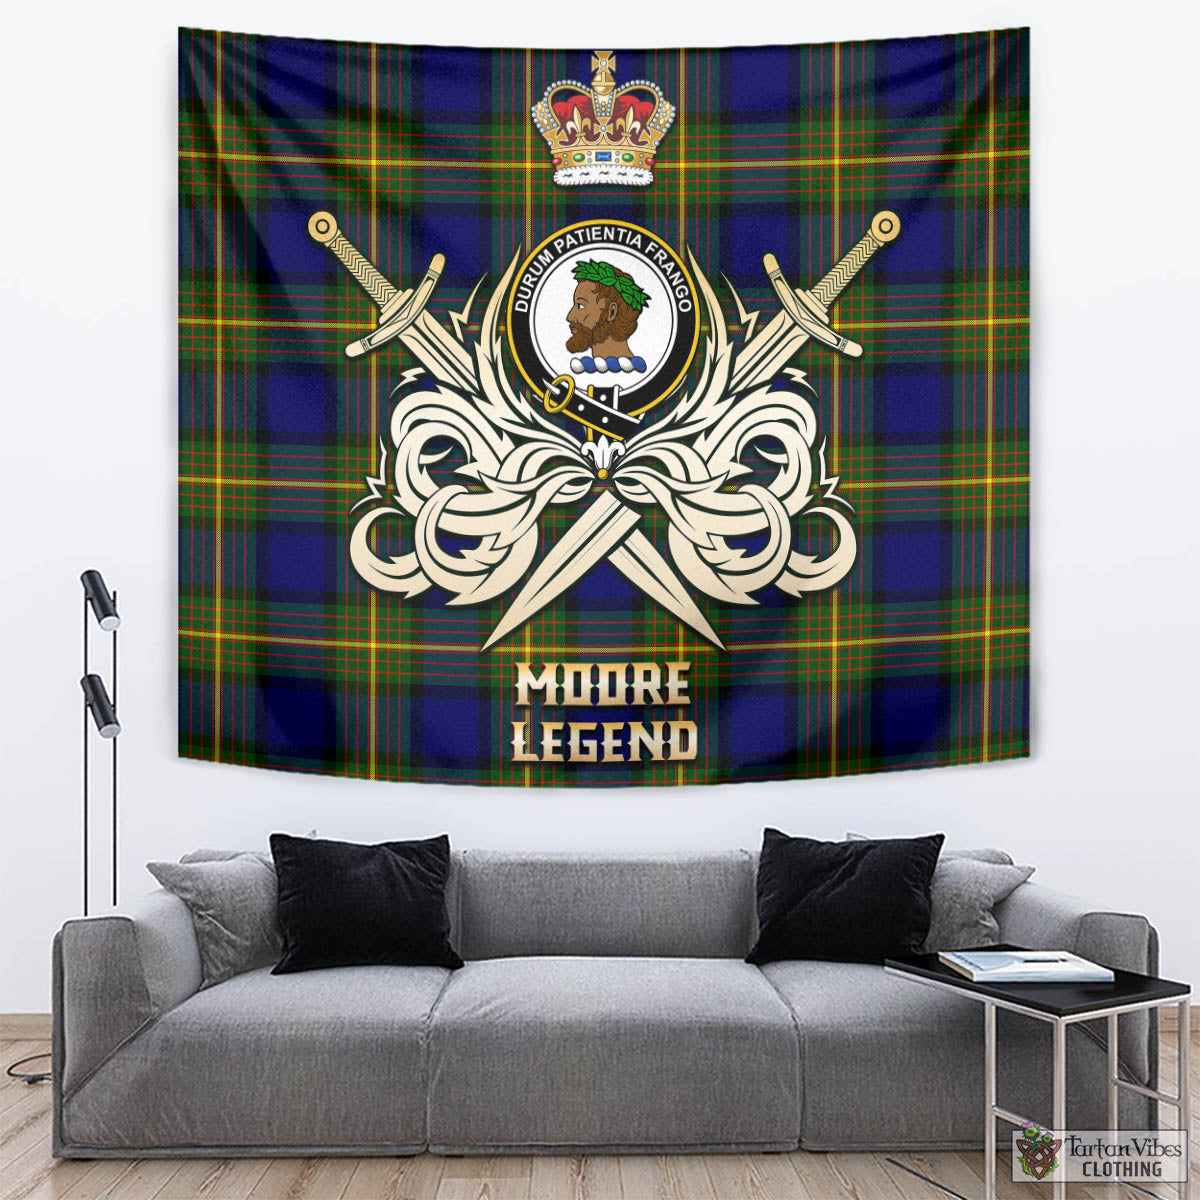 Tartan Vibes Clothing Moore Tartan Tapestry with Clan Crest and the Golden Sword of Courageous Legacy